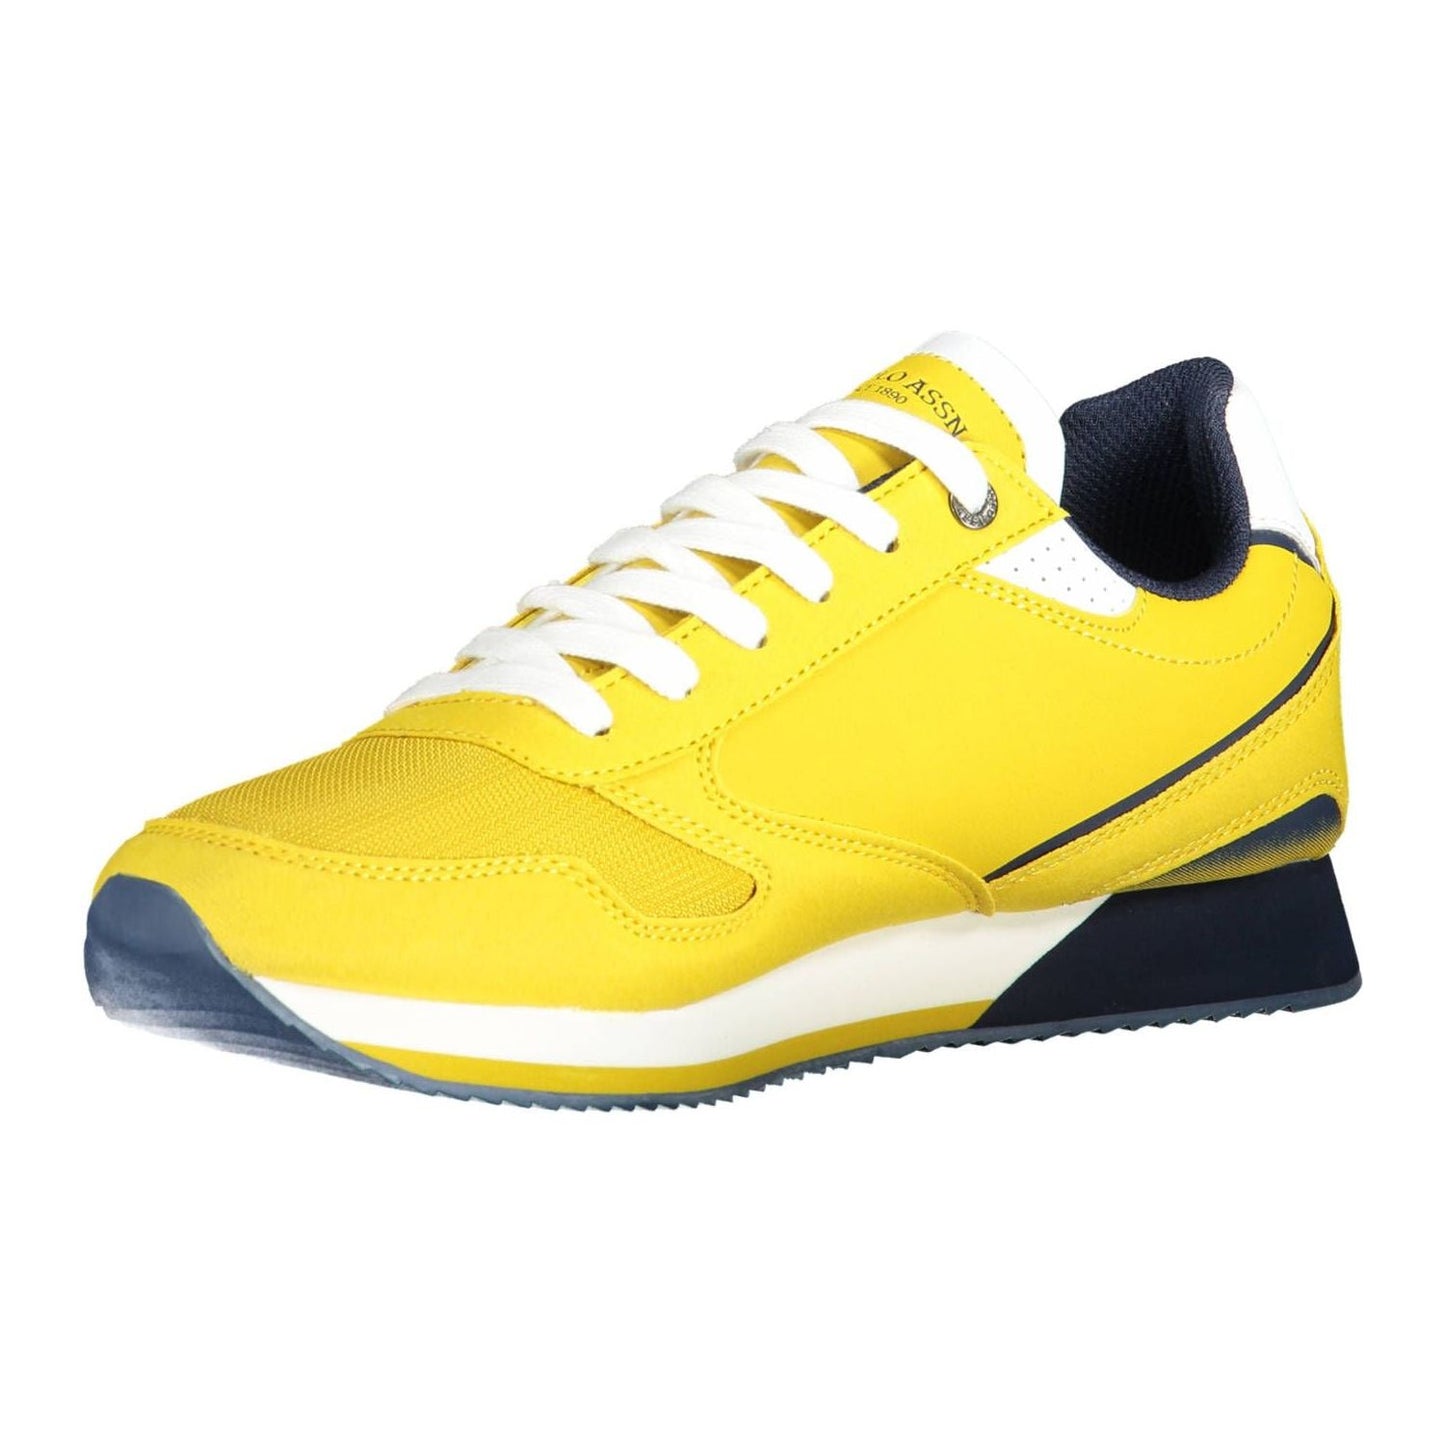 U.S. POLO ASSN. Bold Yellow Laced Sports Sneaker bold-yellow-laced-sports-sneaker